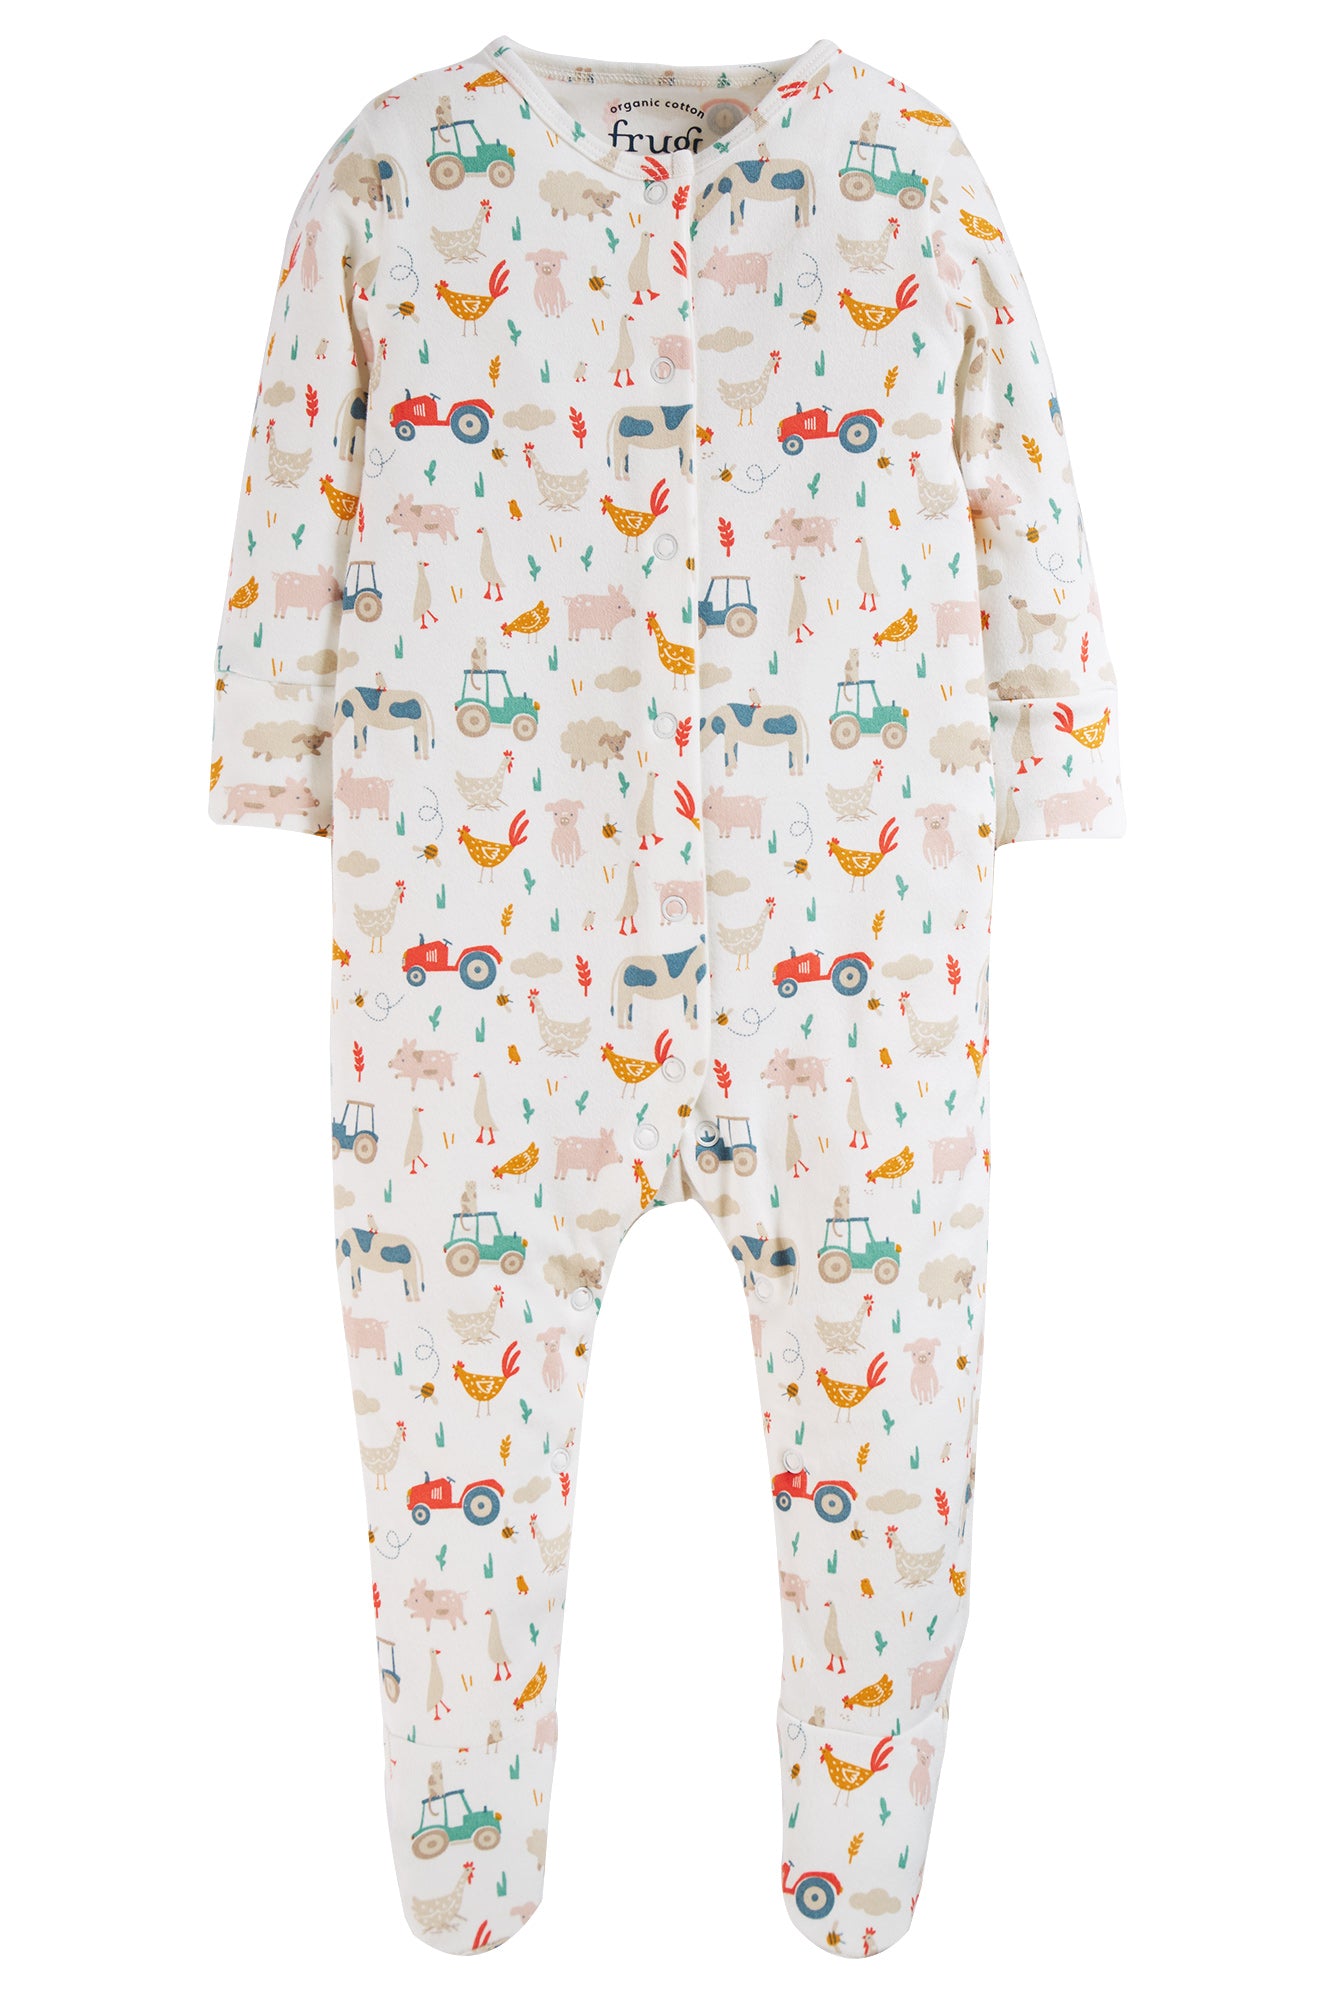 frugi lovely babygrow with farmyard print at whippersnappers online